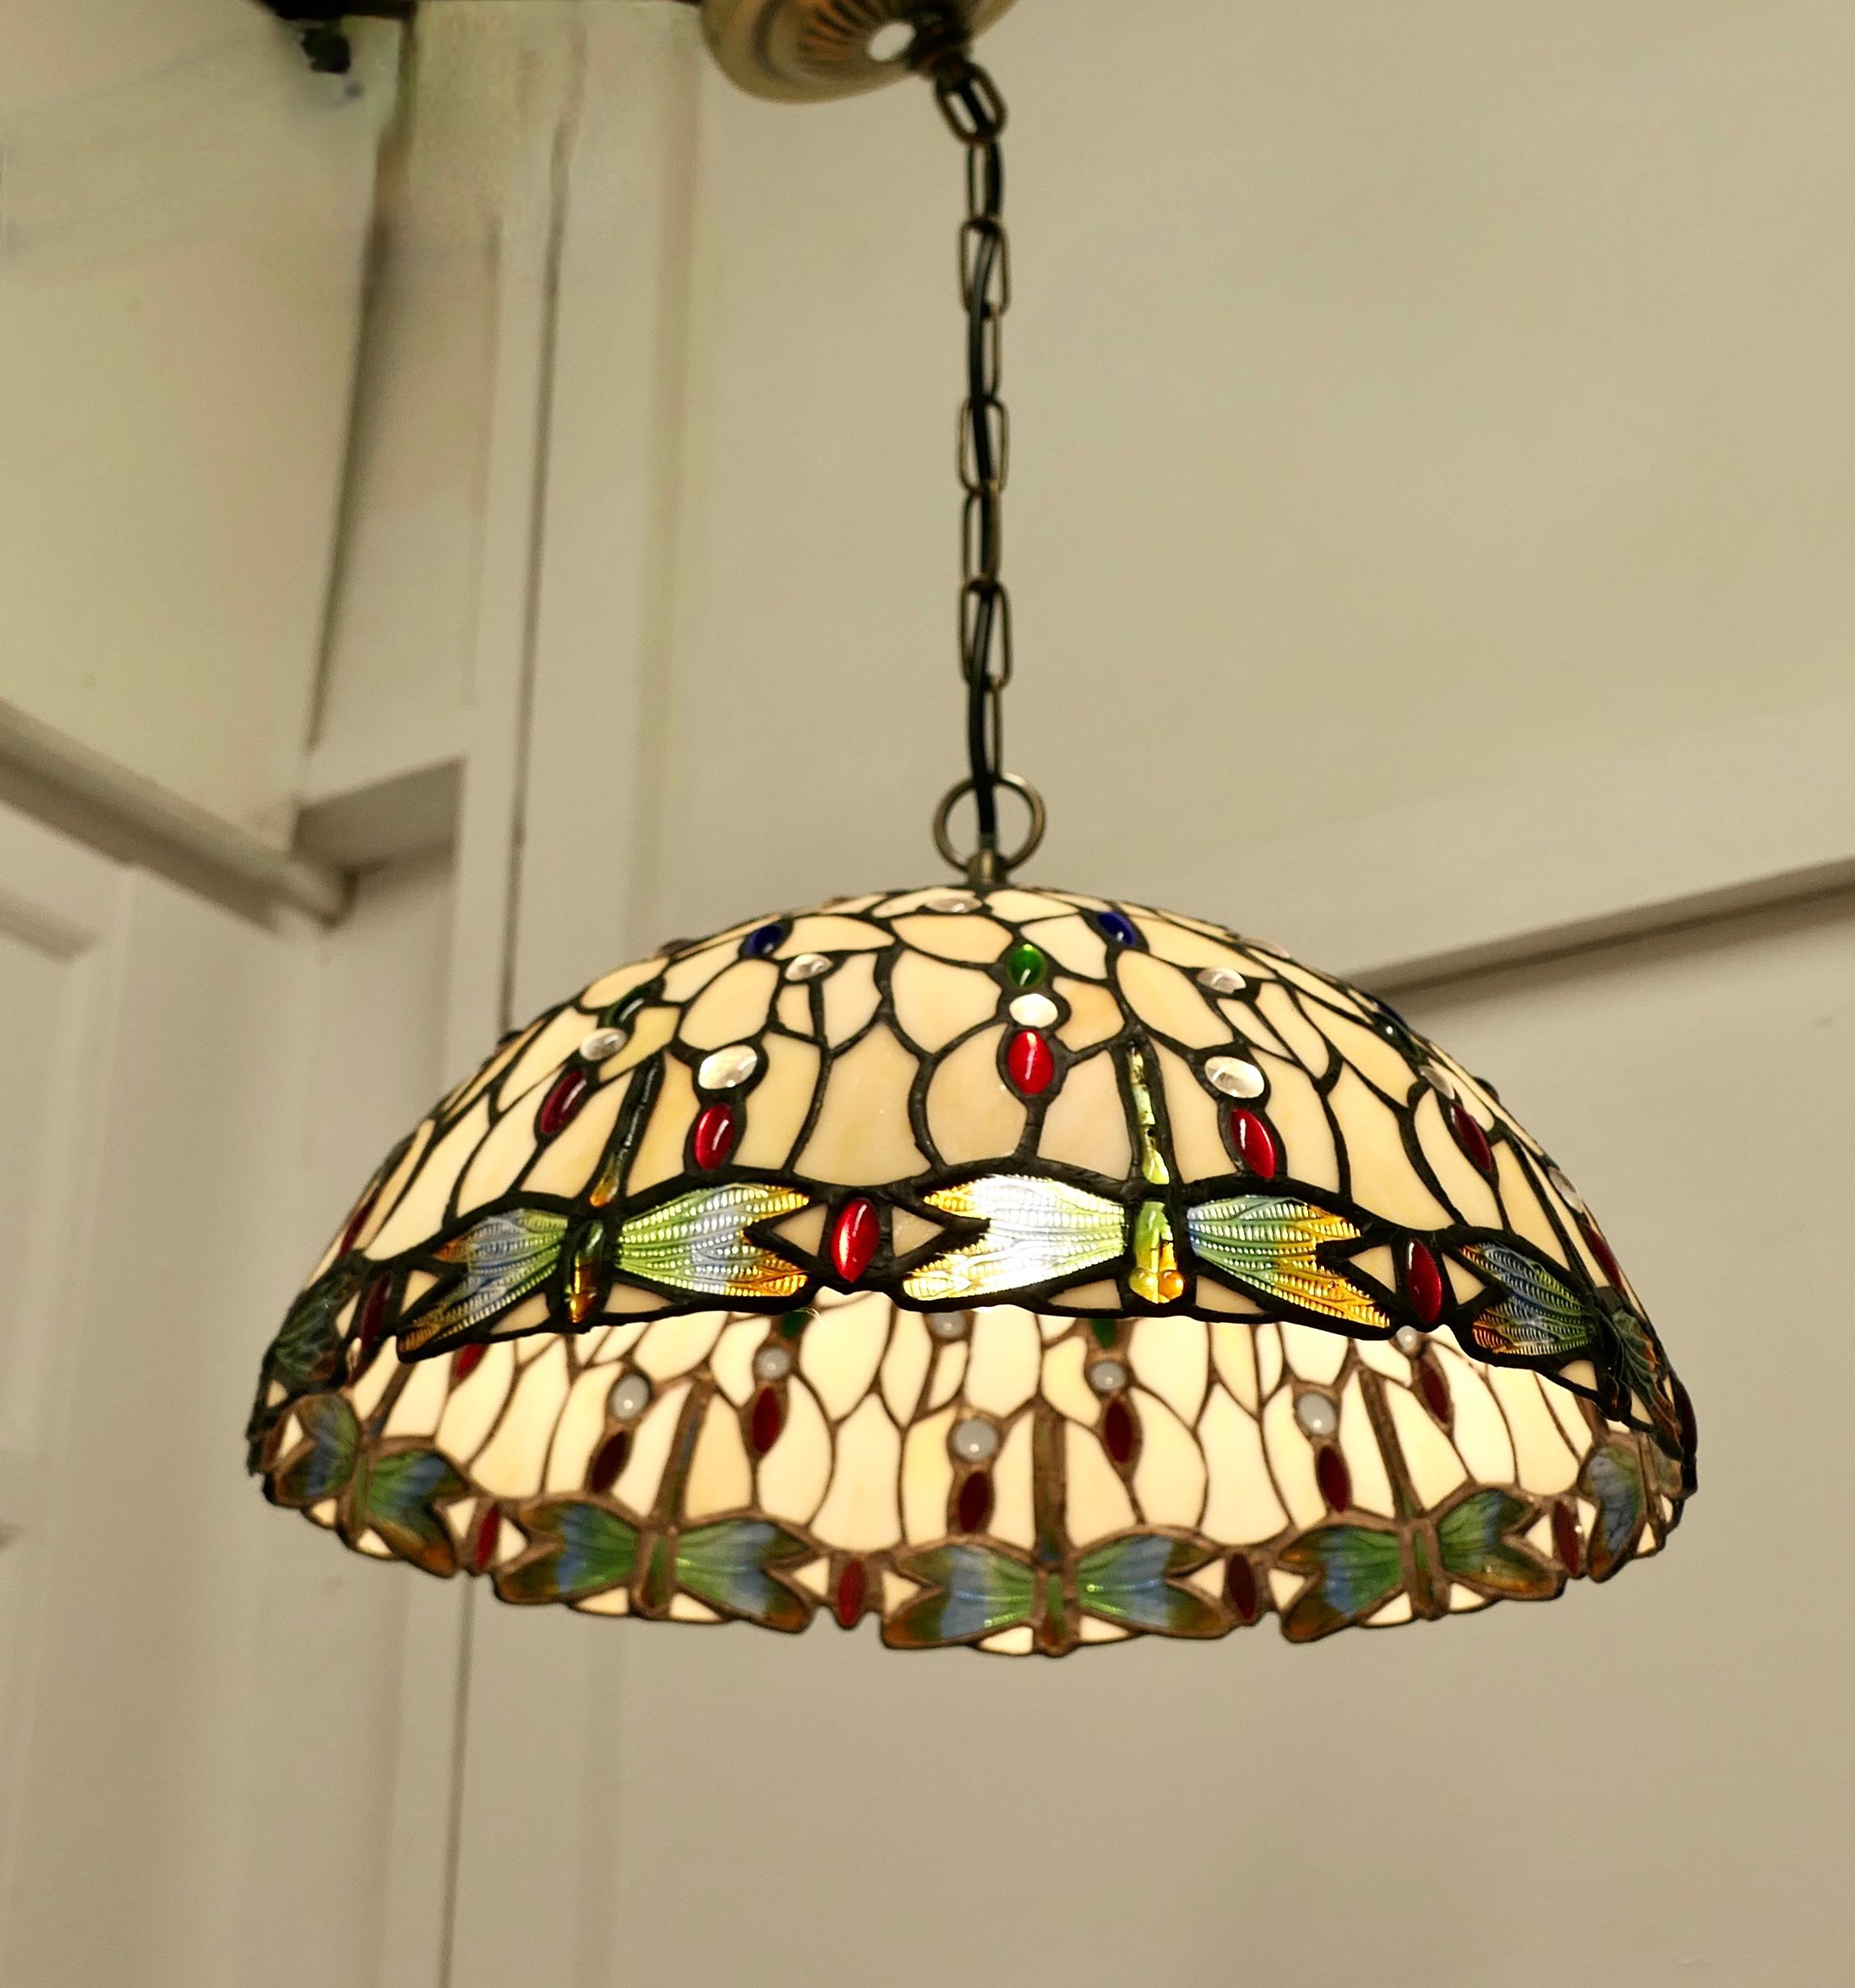 A Pair of Large Vintage Tiffany Style Lights Arts and Crafts Lampshades     For Sale 3